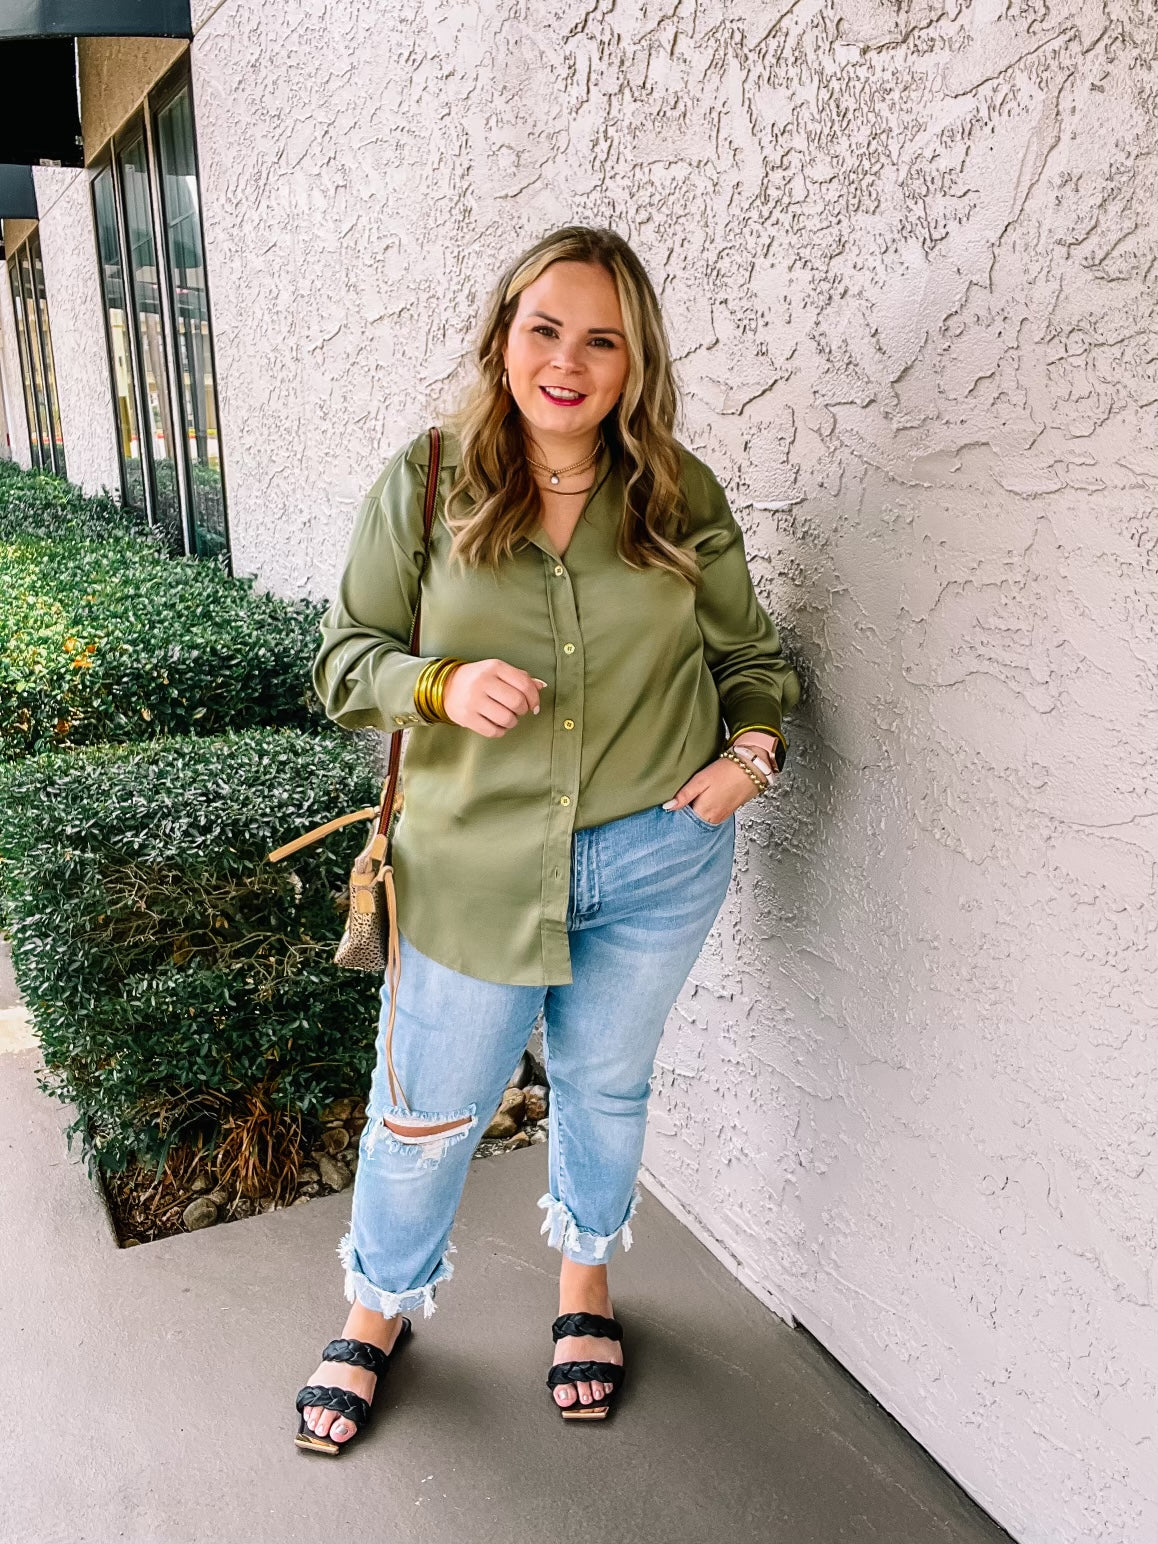 Tell Me Something Good Long Sleeve Button Up Top in Olive Green - Giddy Up Glamour Boutique